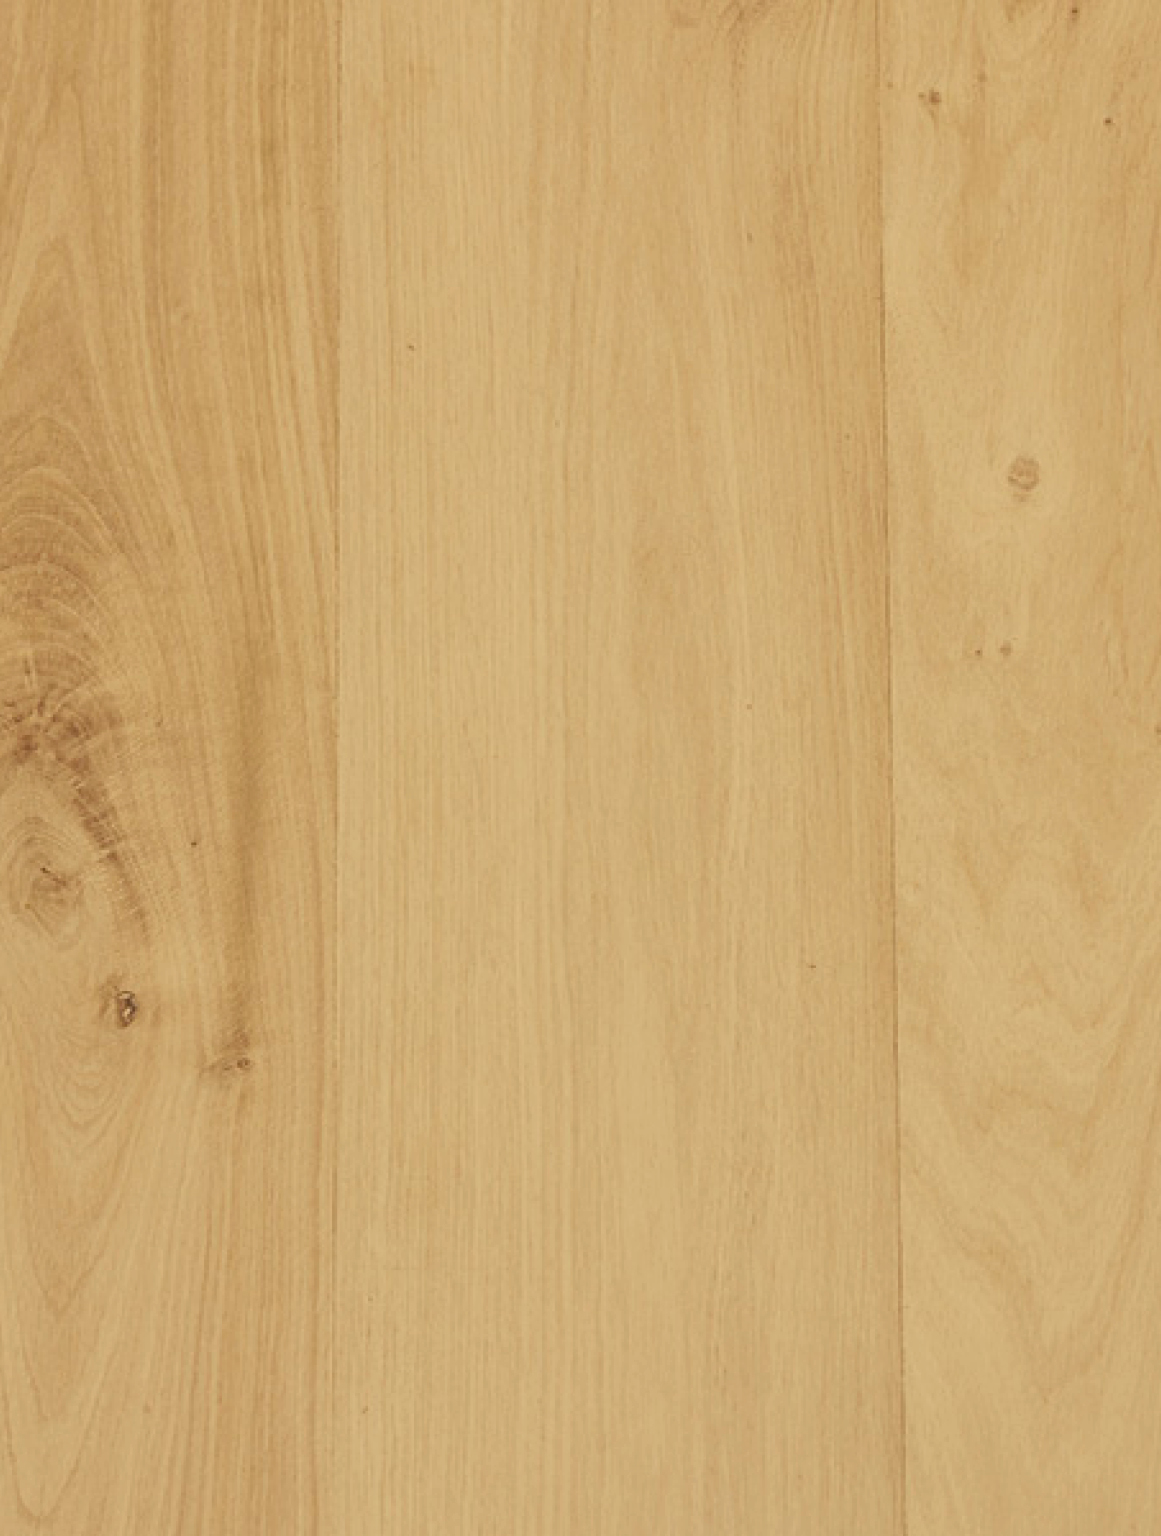 Long and wide Grand Oak Plank